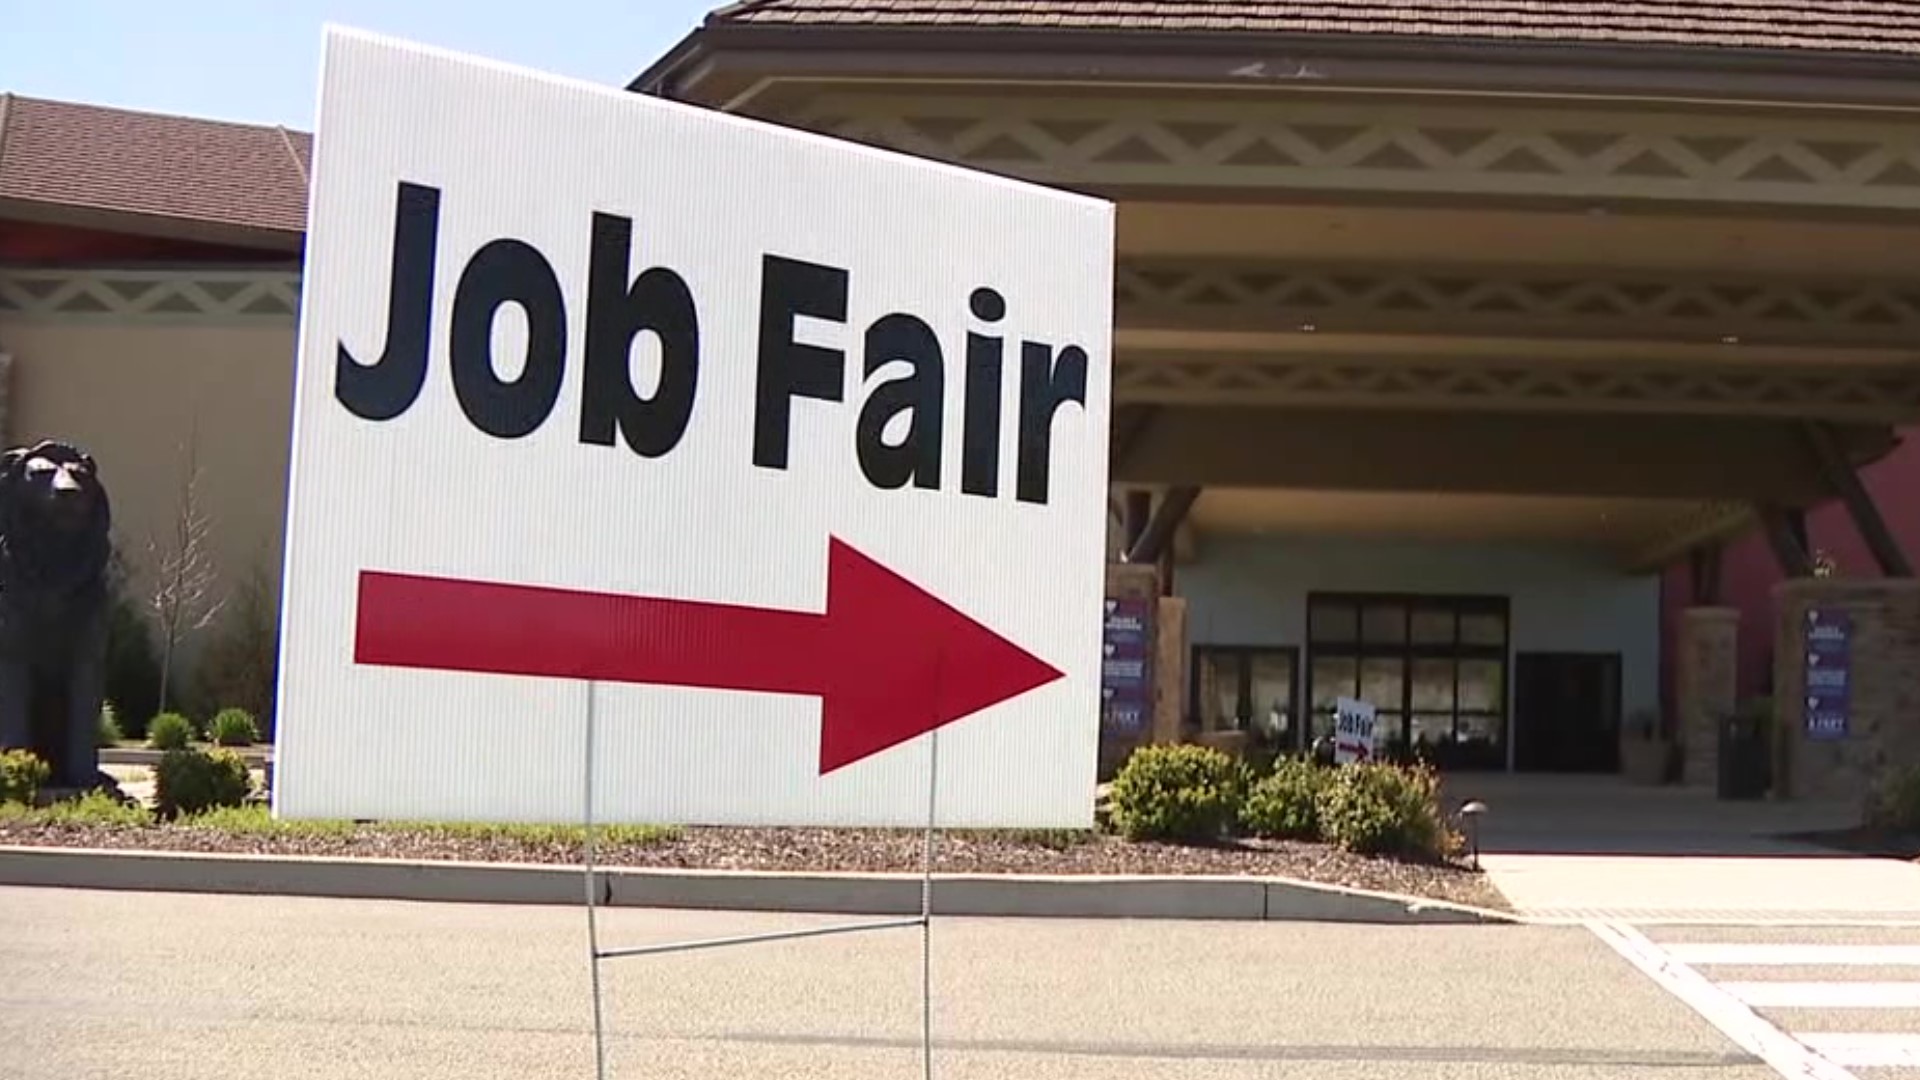 Fairs were hosted at several venues to help resorts and other businesses hire employees.